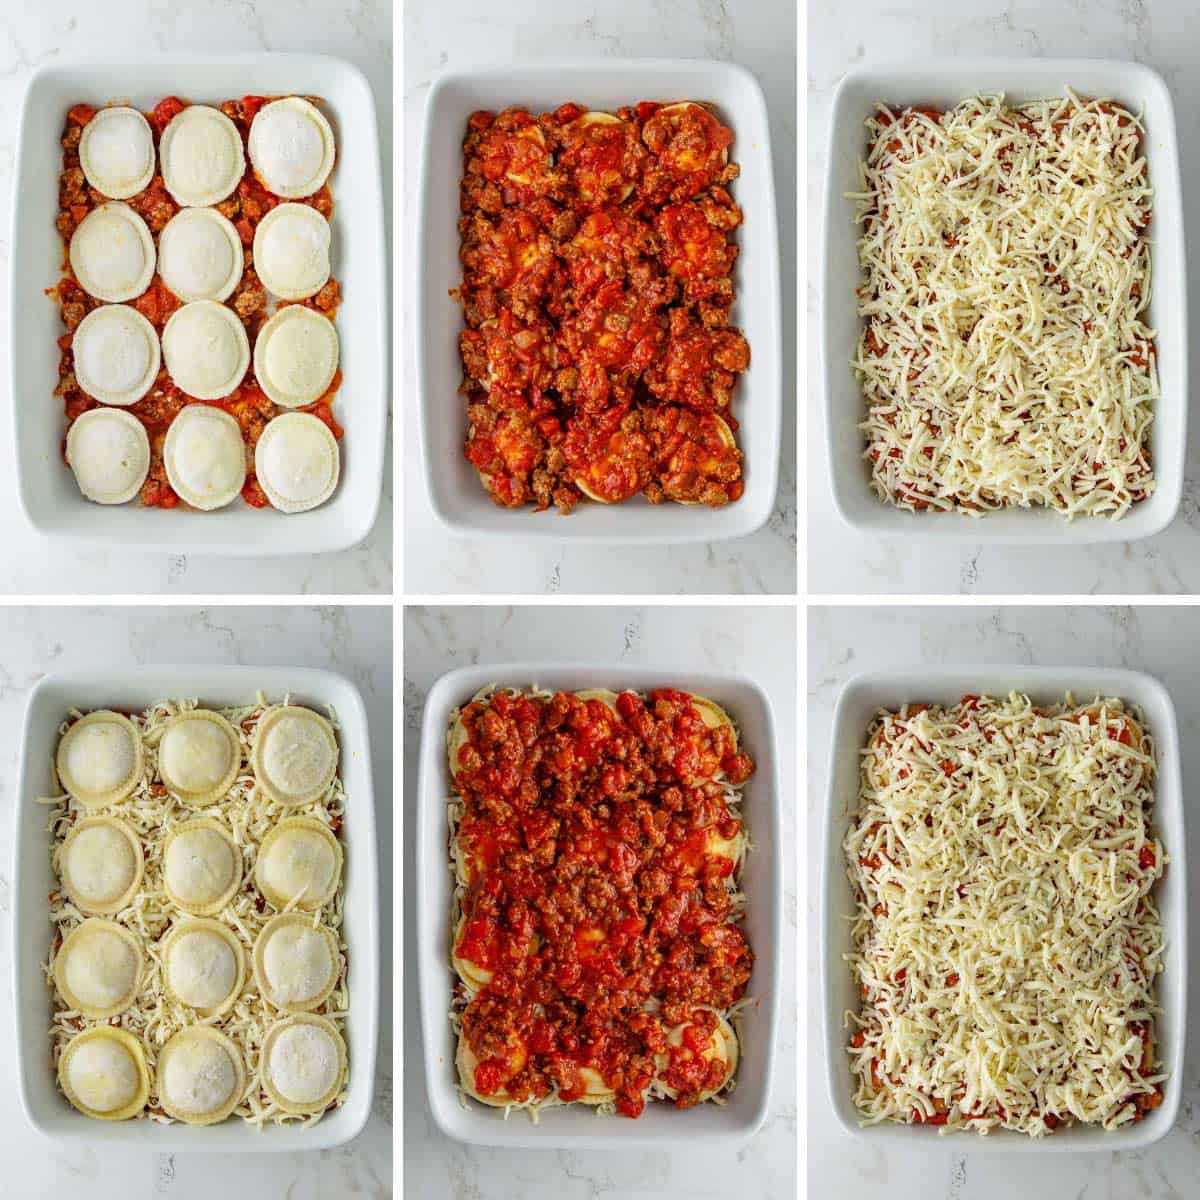 A collage of six images showing how to assemble ingredients in a baking dish for baked ravioli.